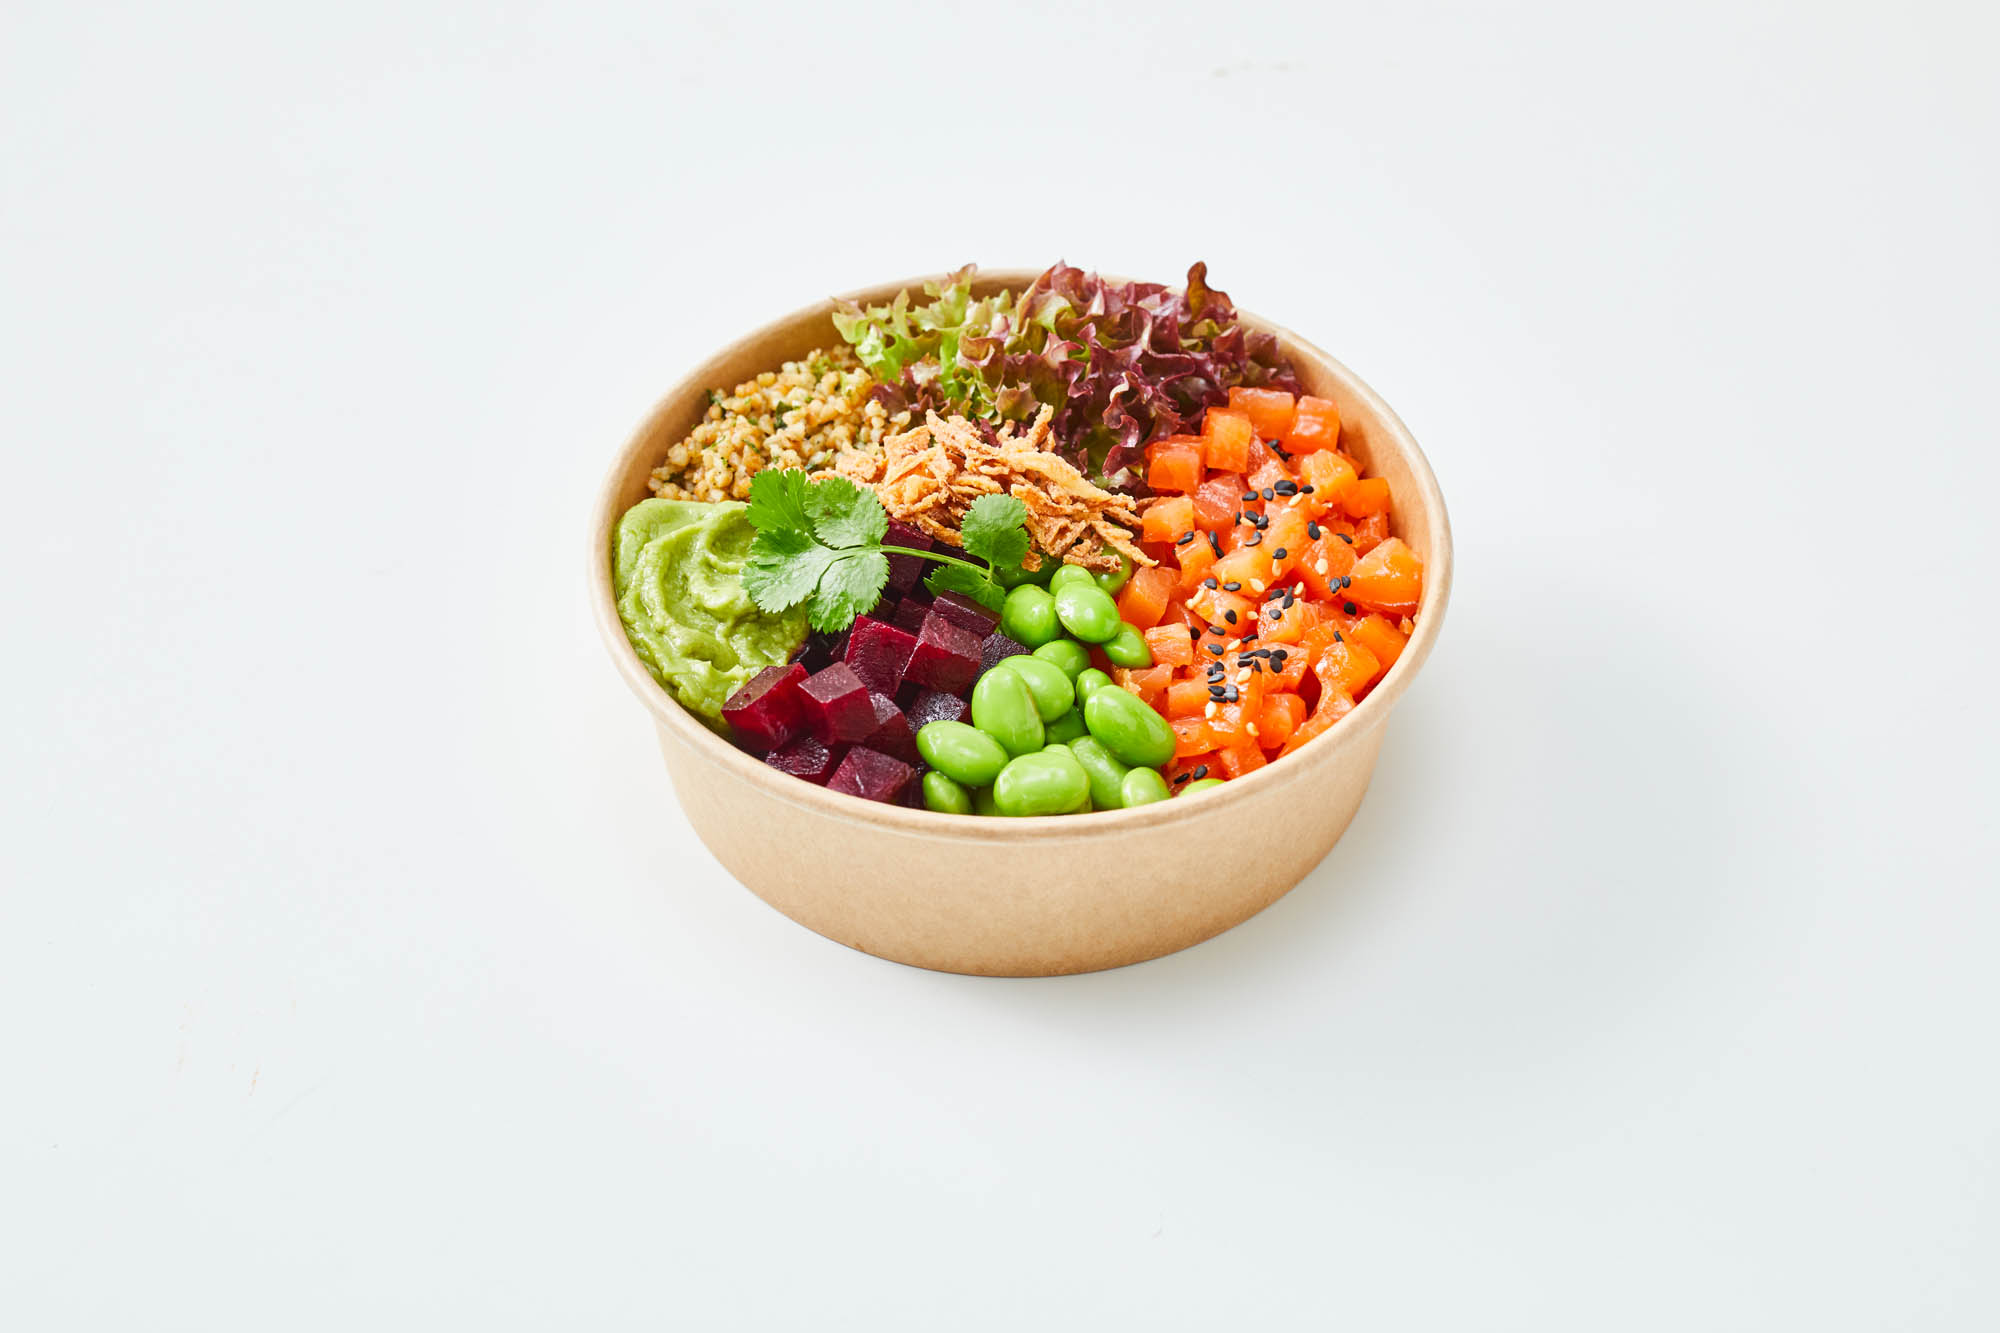 a bowl of food on a white background